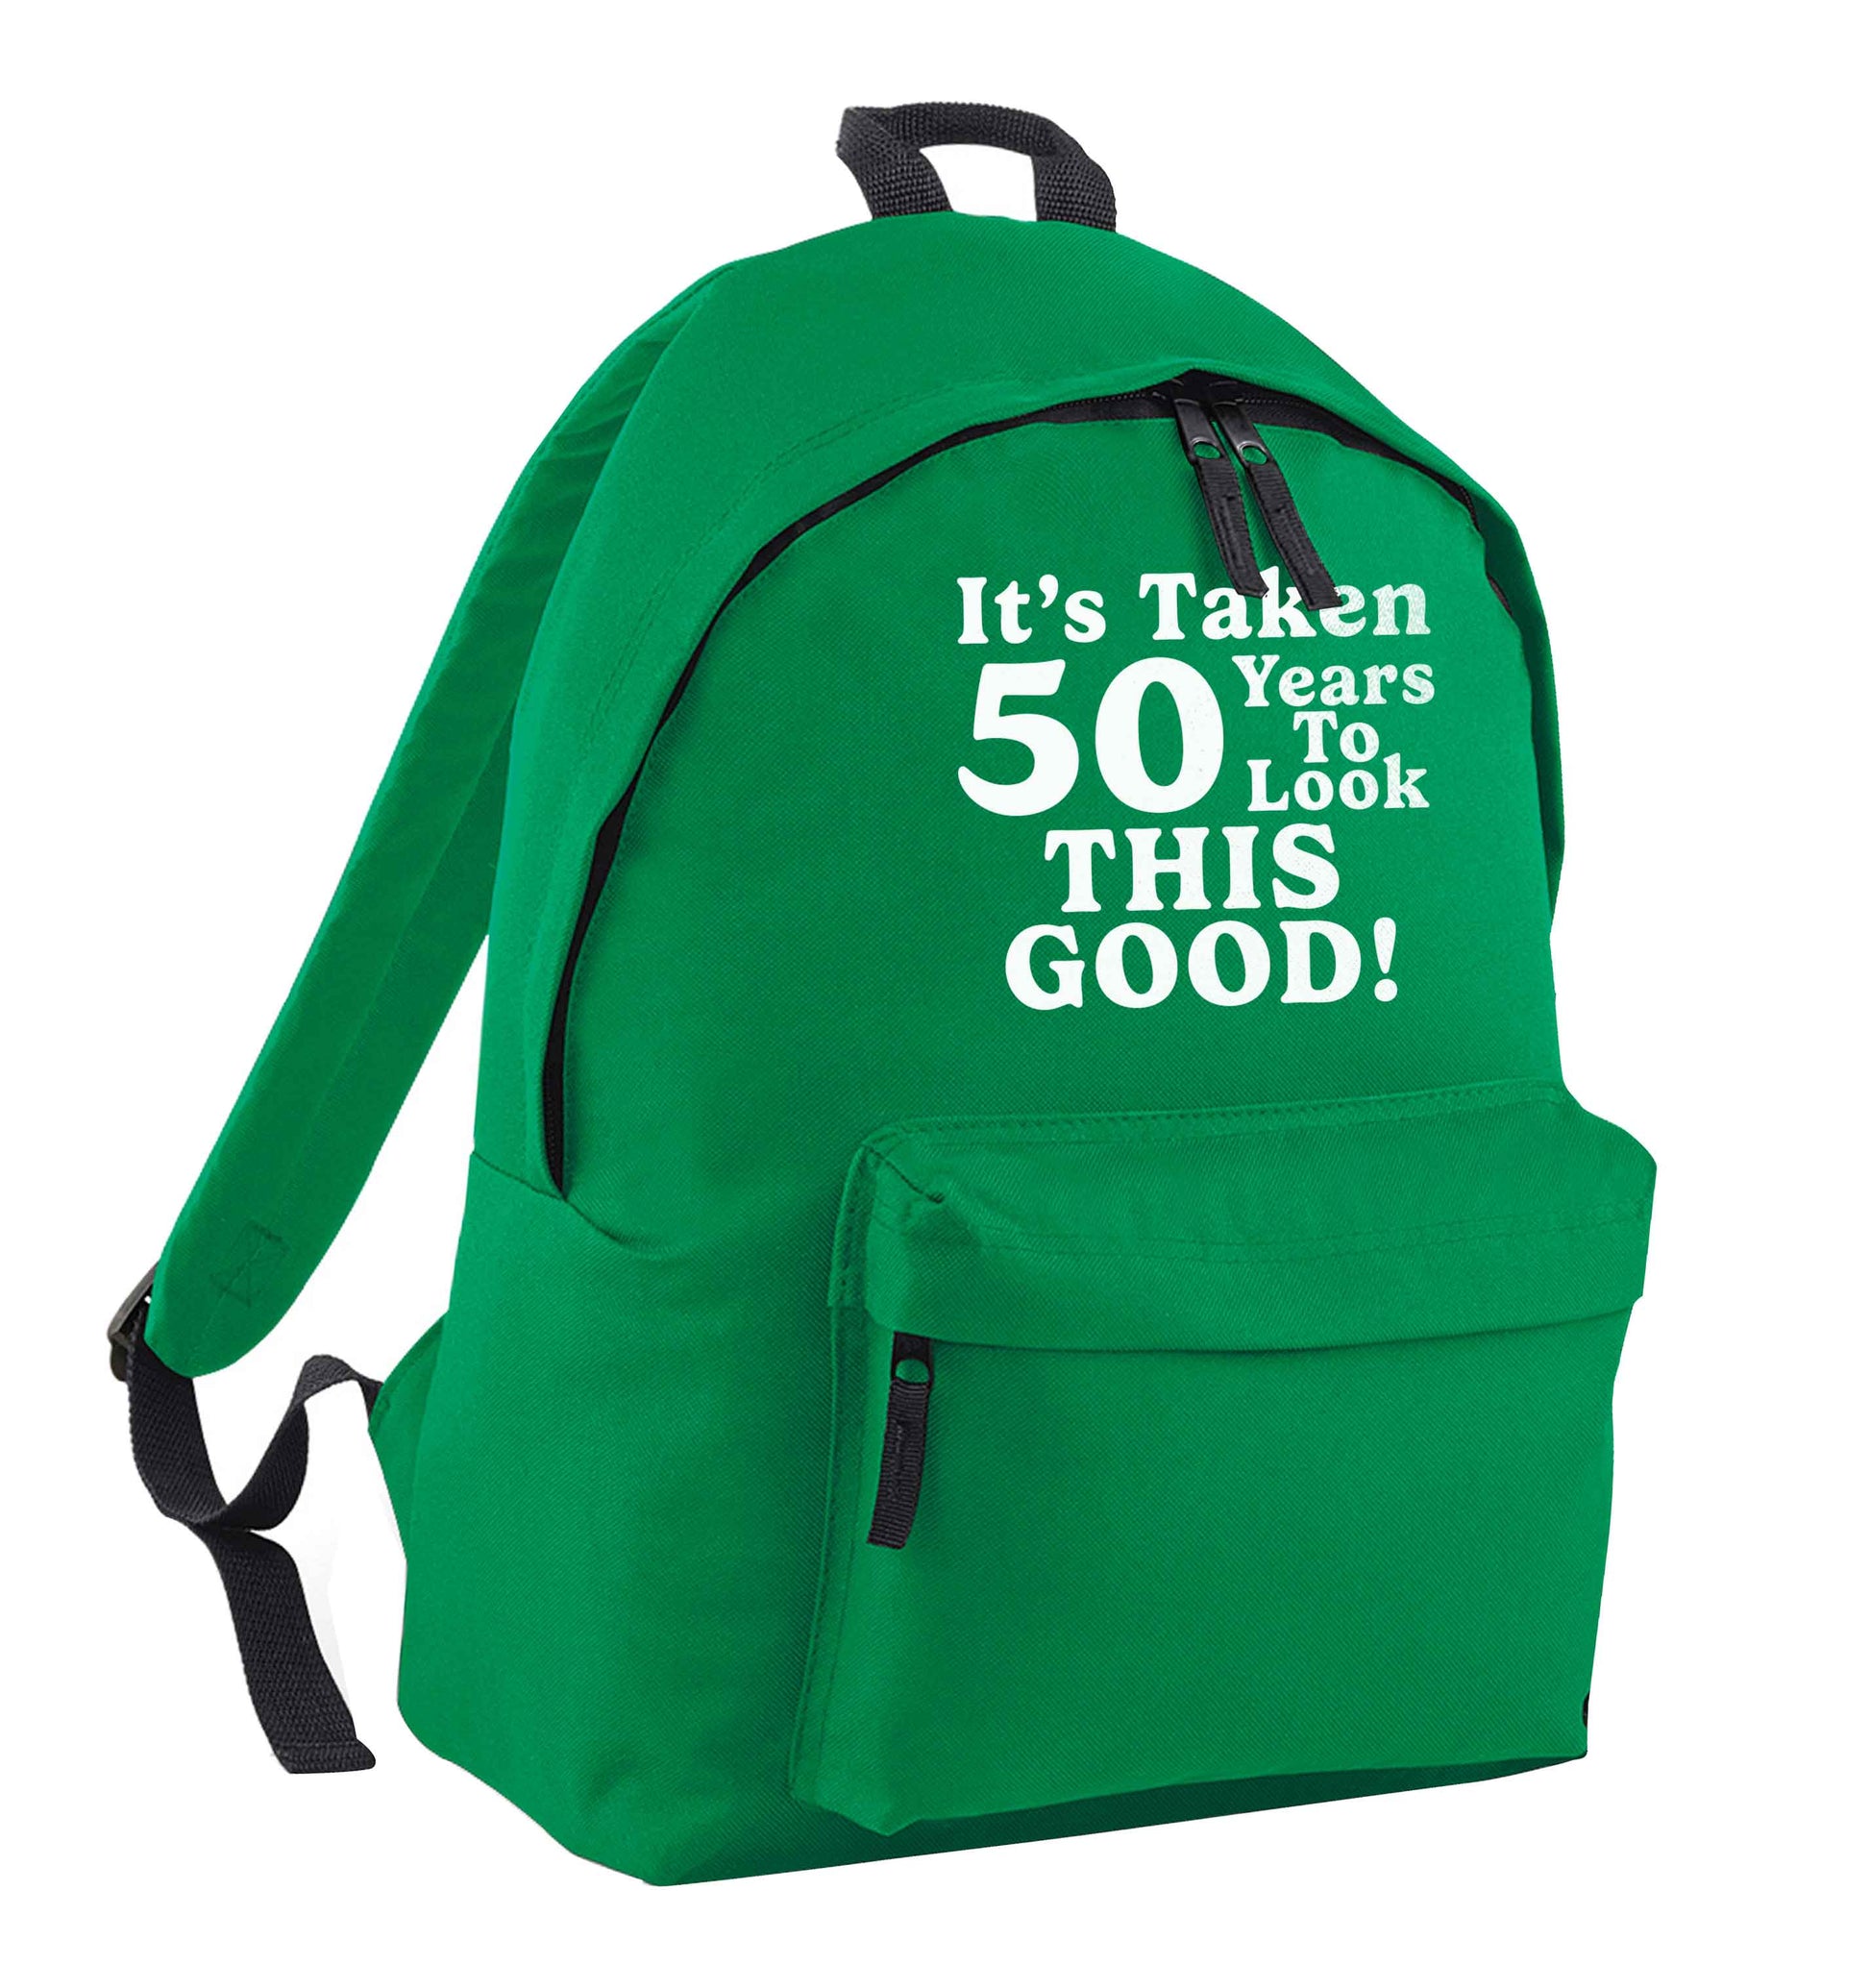 It's taken 50 years to look this good! green adults backpack